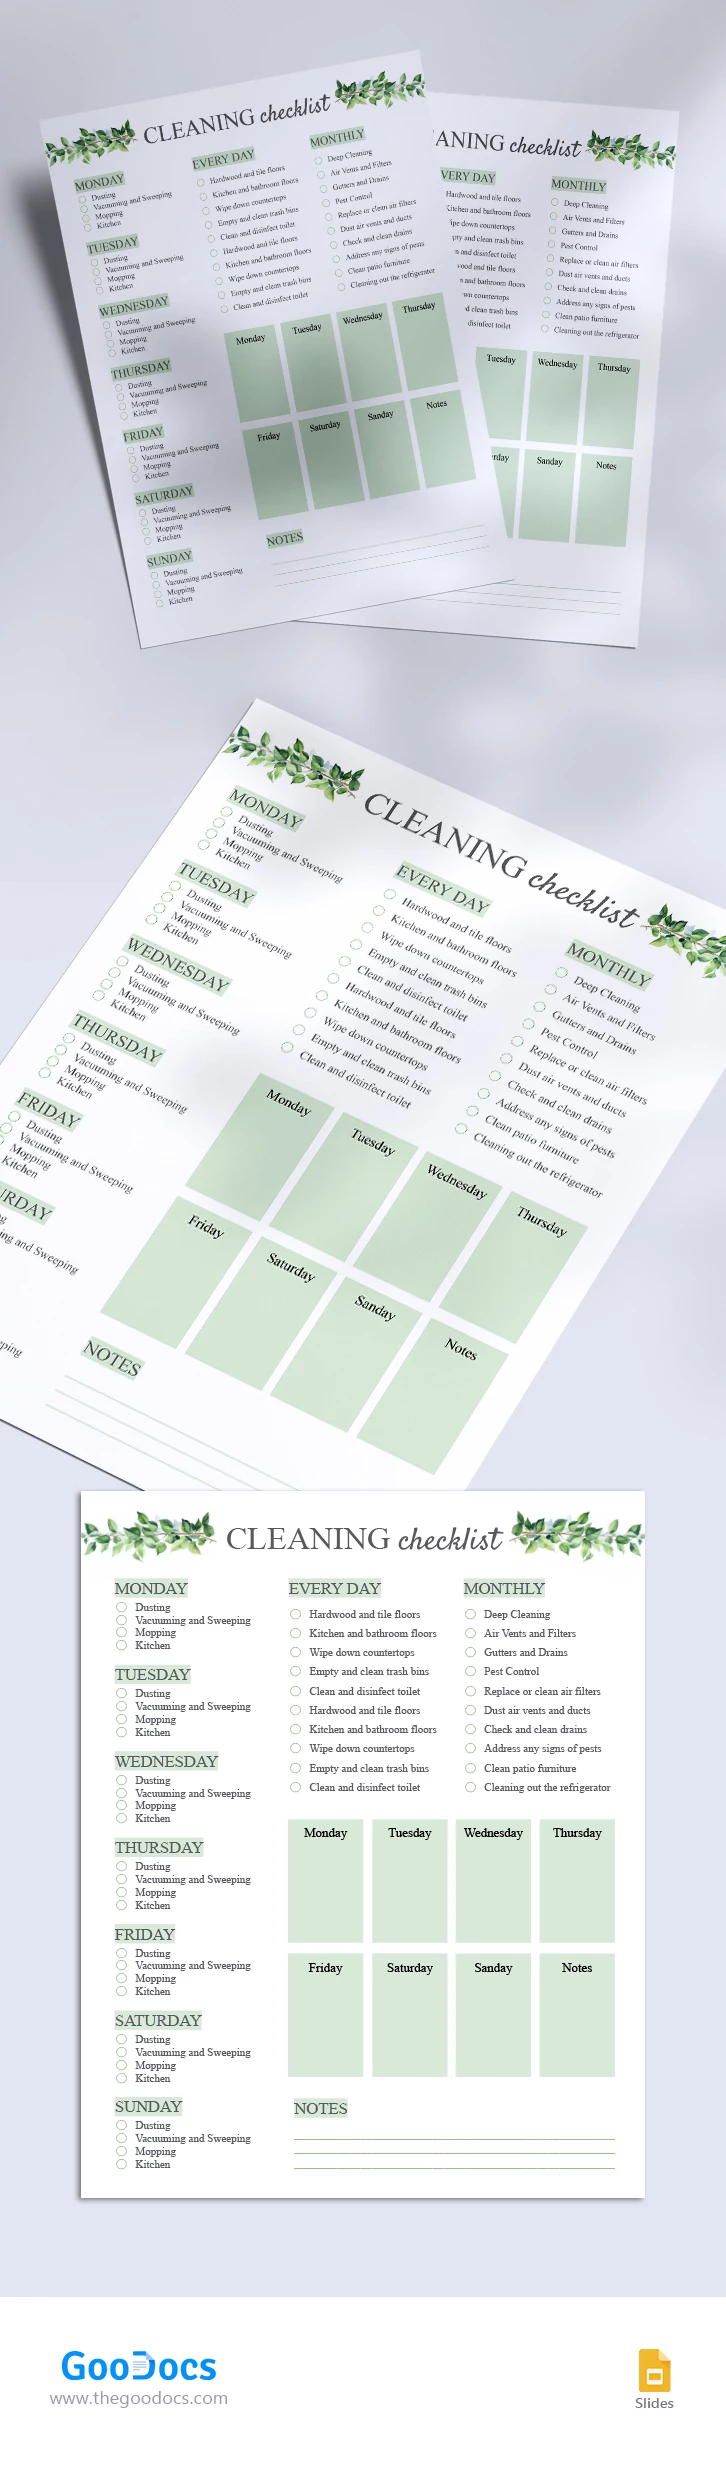 Cleaning Checklist - free Google Docs Template - 10067622